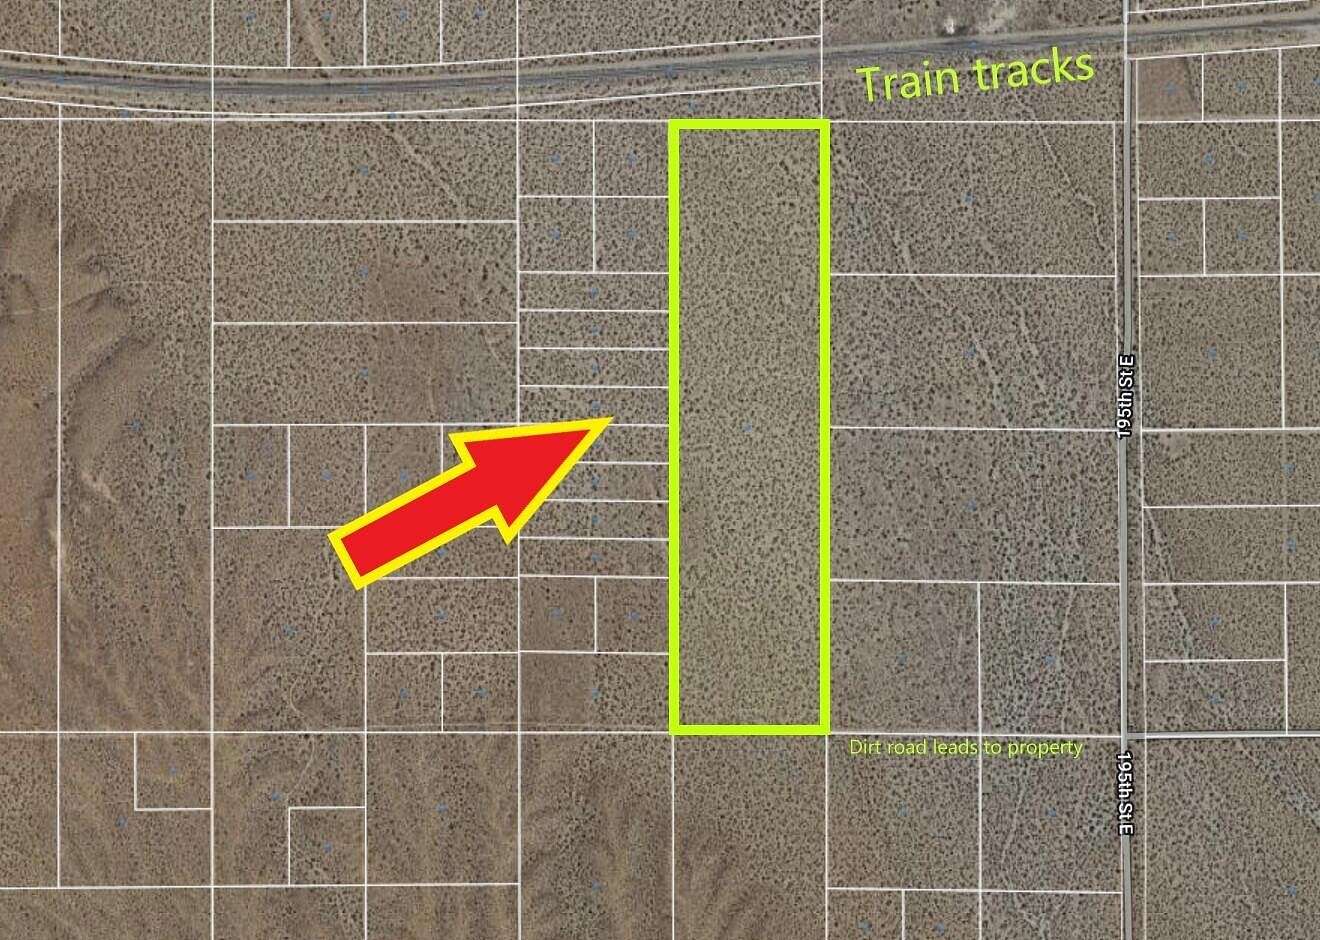 39.7 Acres of Land for Sale in Palmdale, California